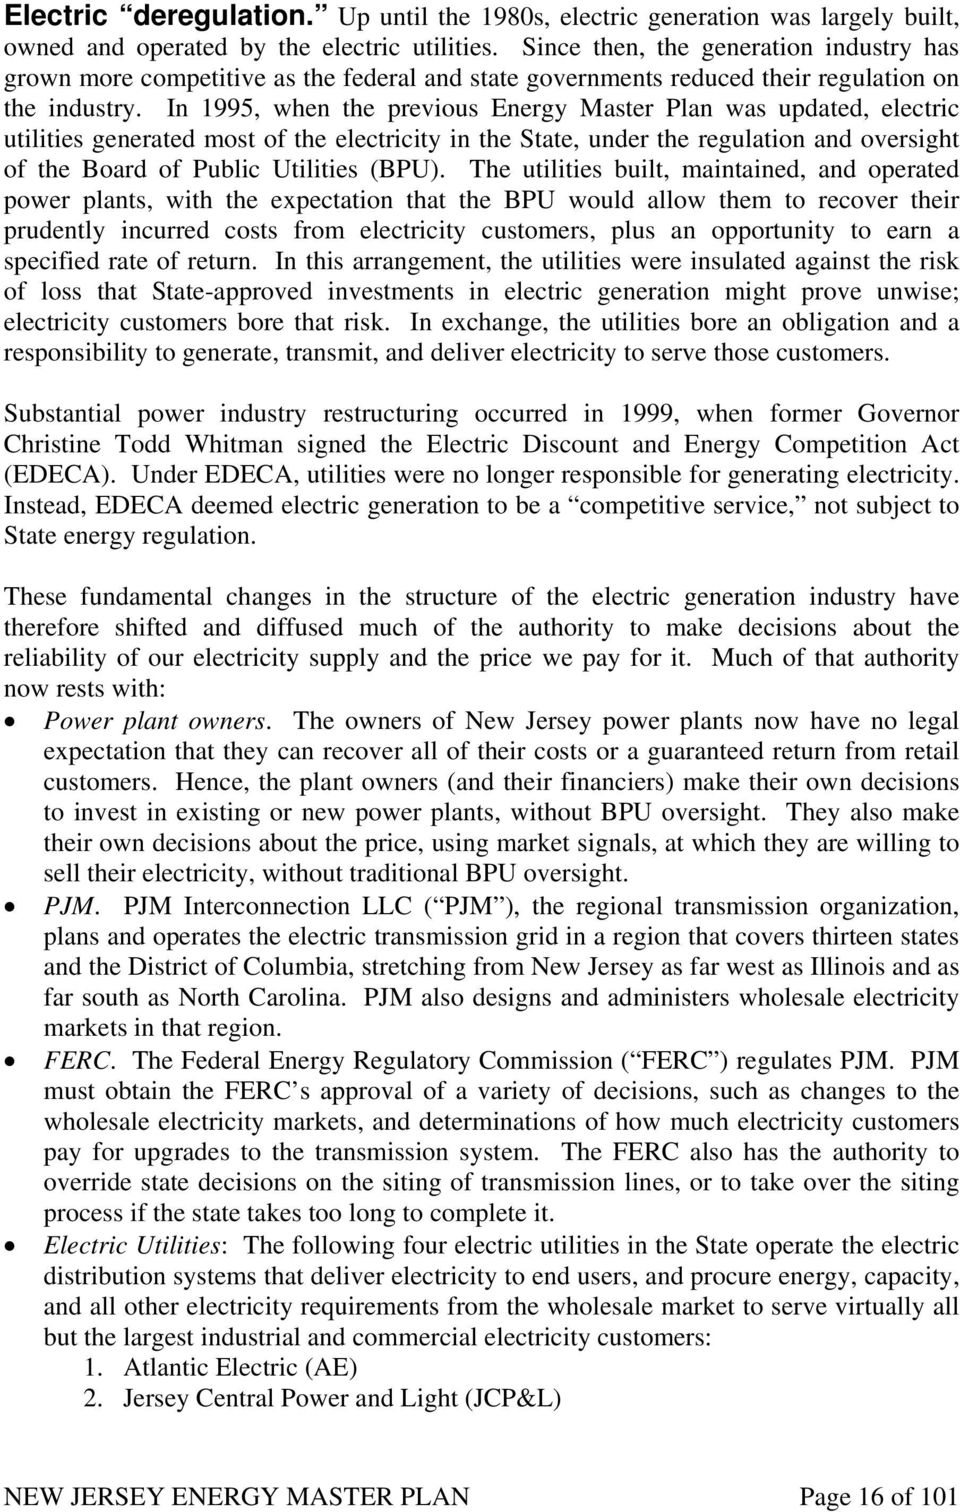 In 1995, when the previous Energy Master Plan was updated, electric utilities generated most of the electricity in the State, under the regulation and oversight of the Board of Public Utilities (BPU).